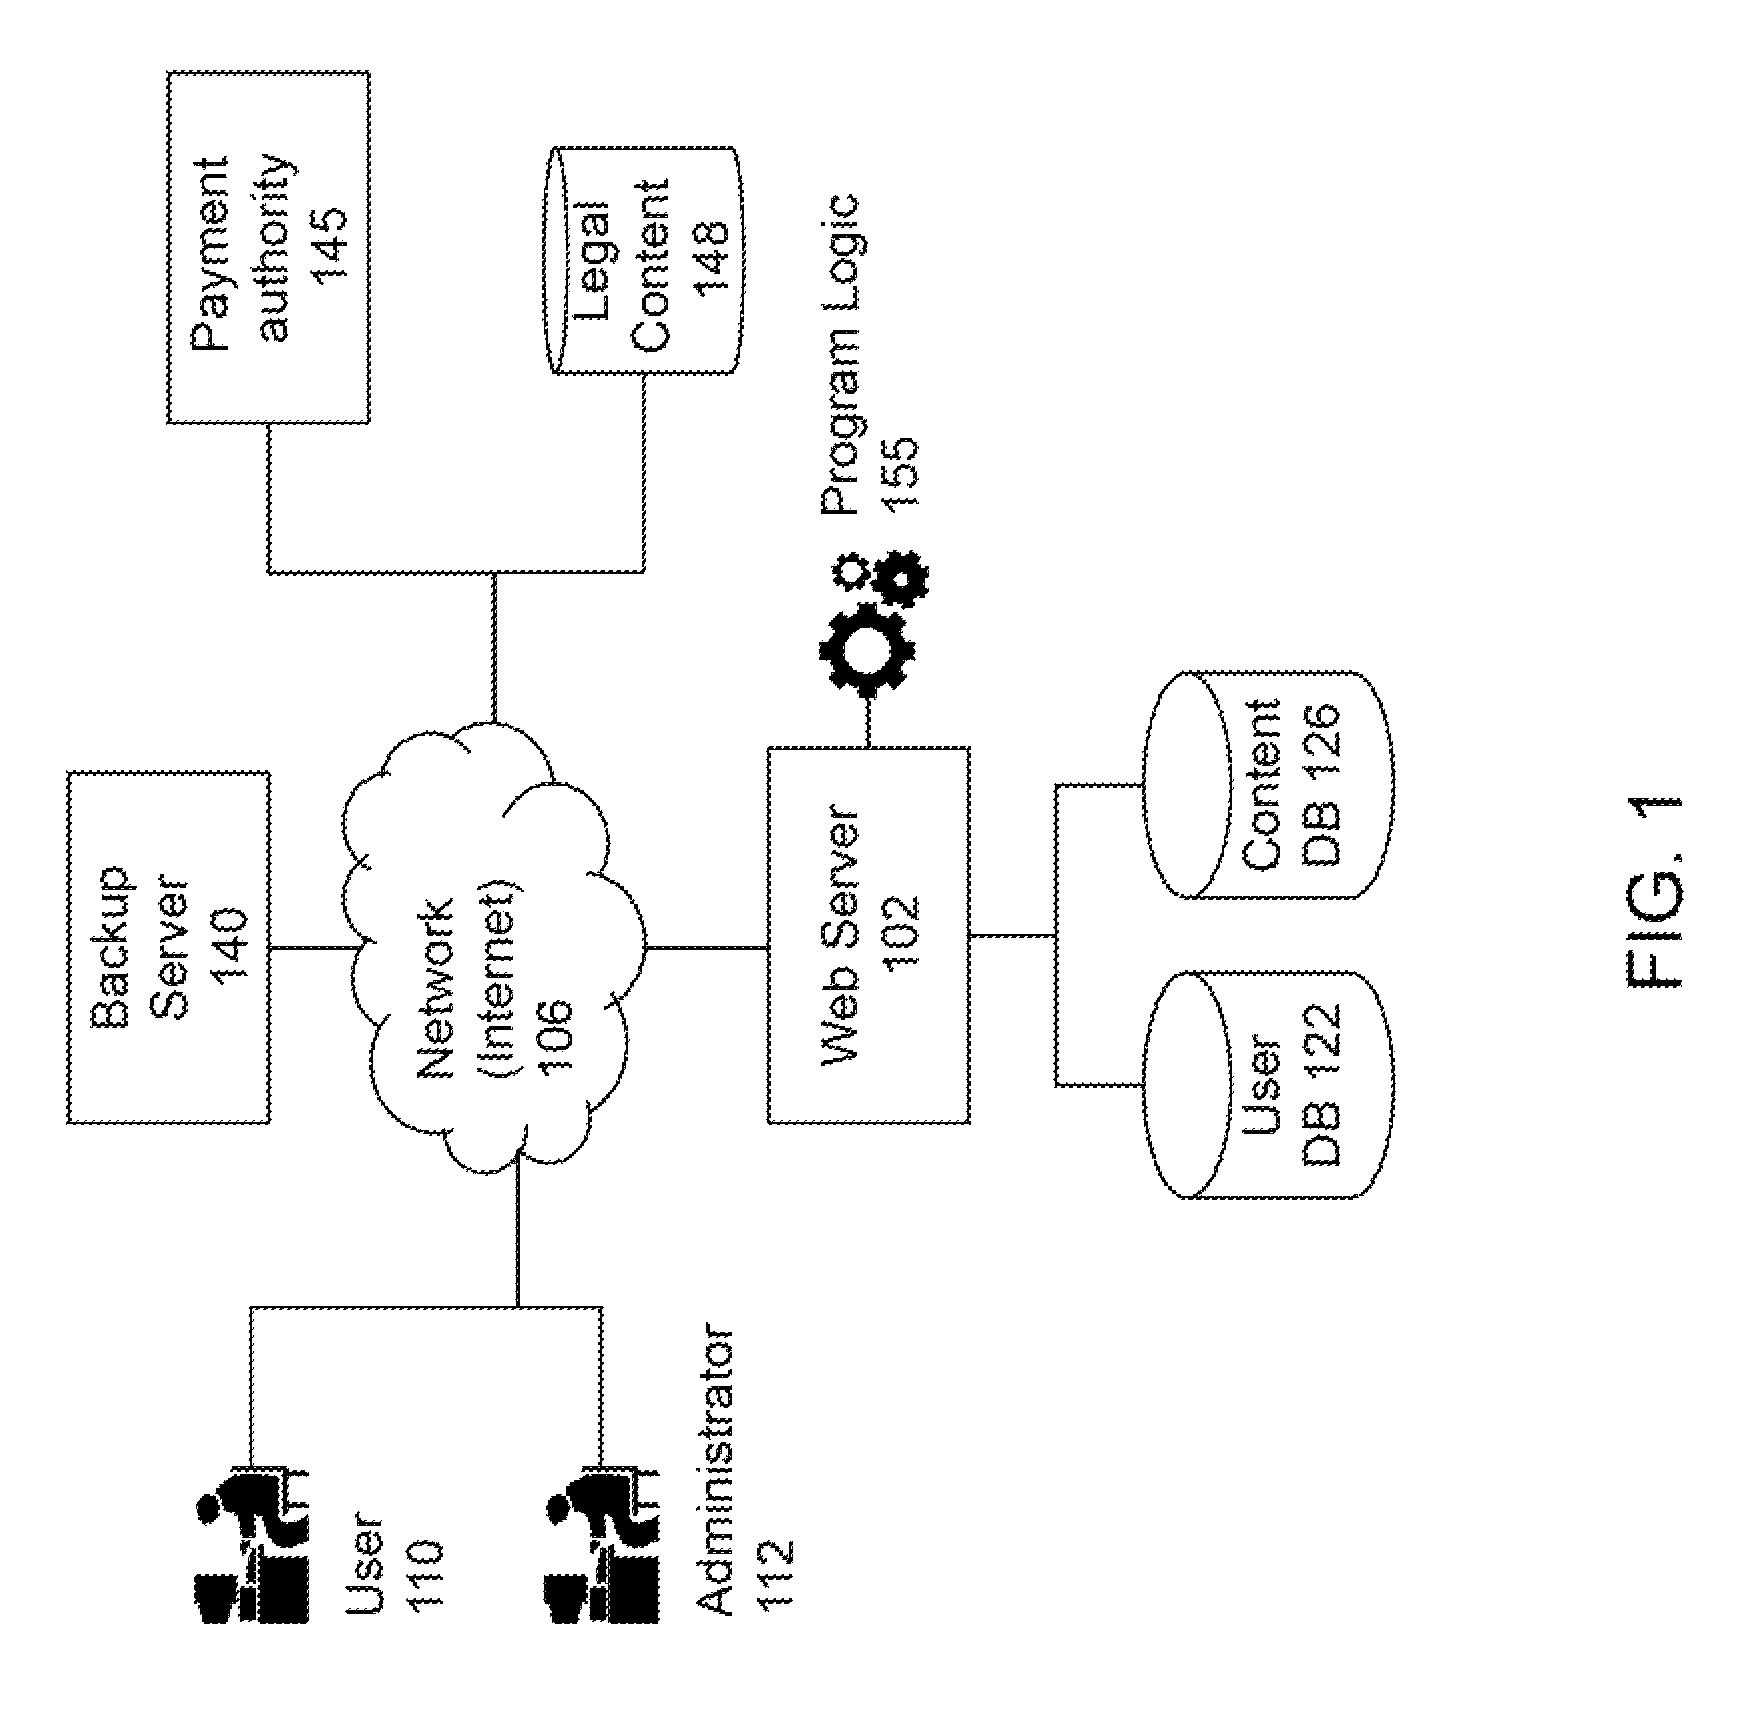 Automated legal evaluation using a decision tree over a communications network